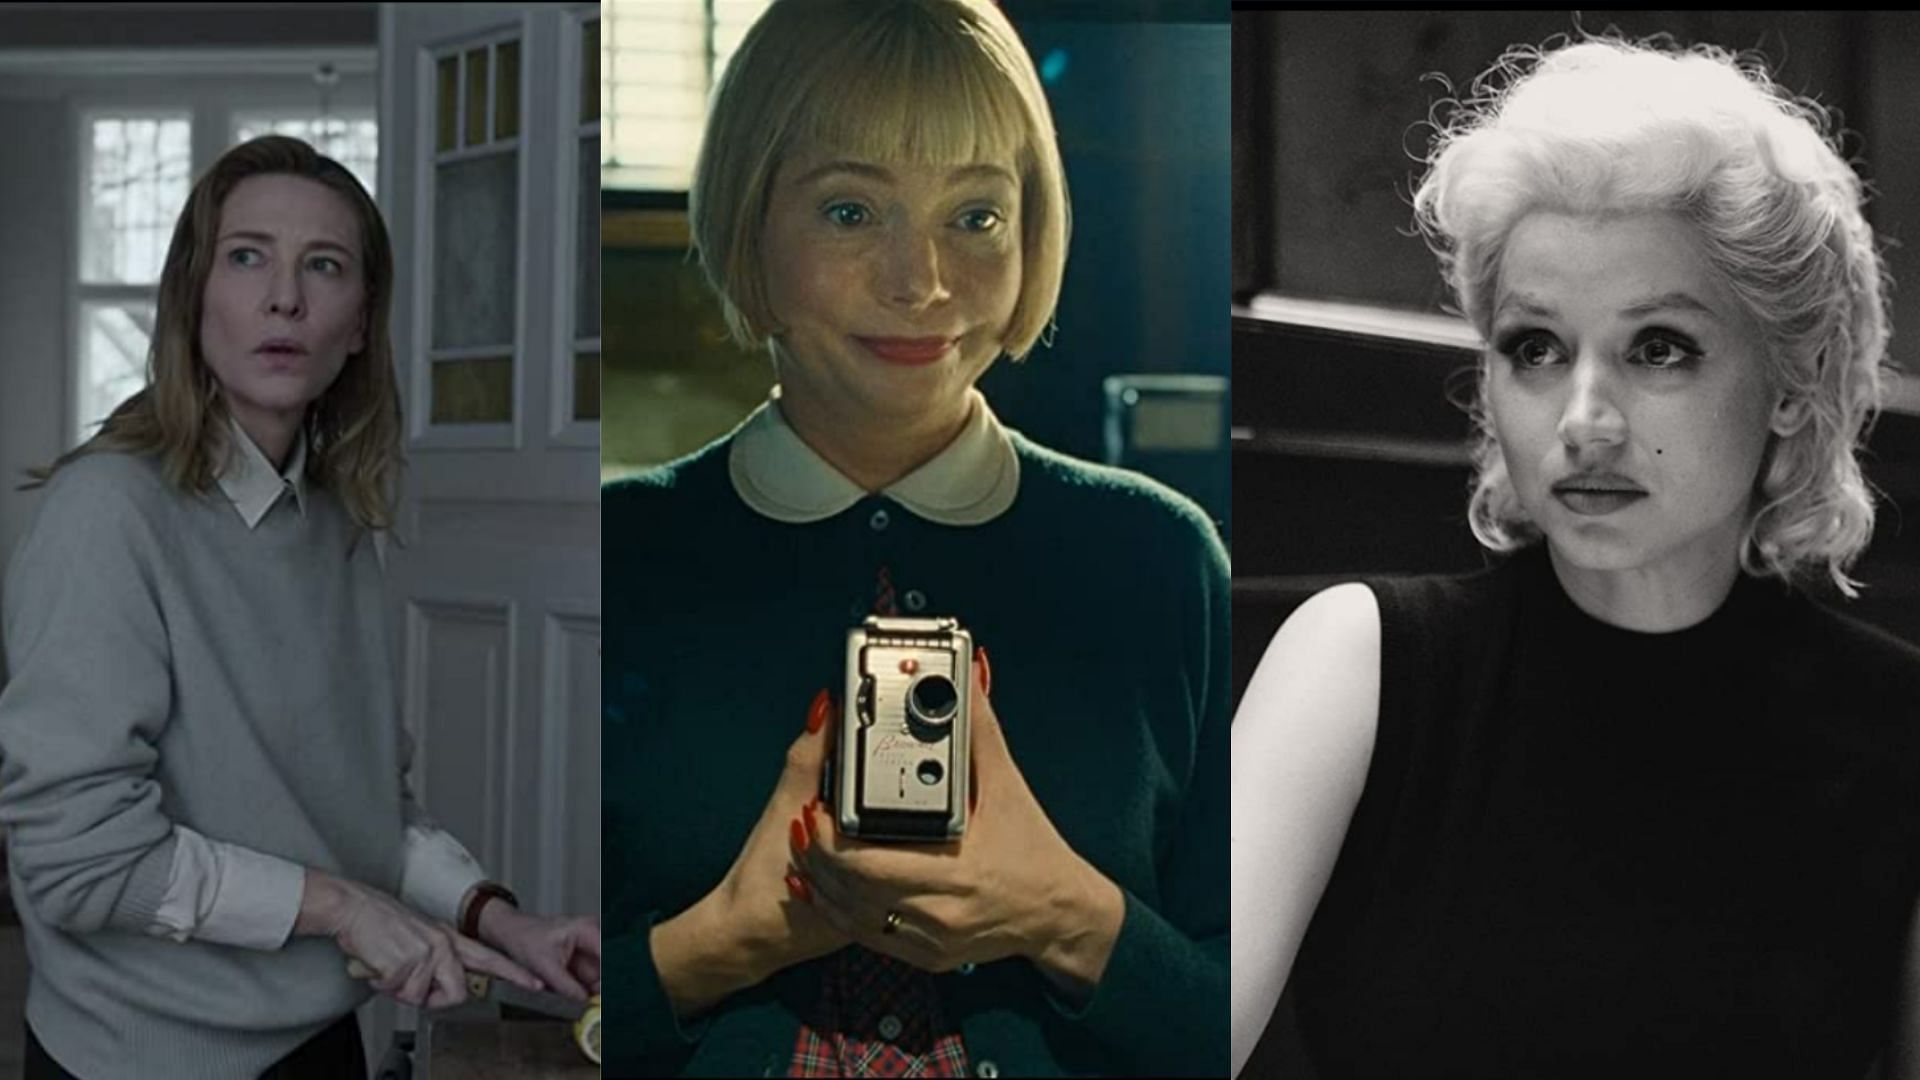 stills of Cate Blanchett in T&aacute;r, Michelle Williams in The Fabelmans and Ana de Armas in Blonde (Images Via IMDb)